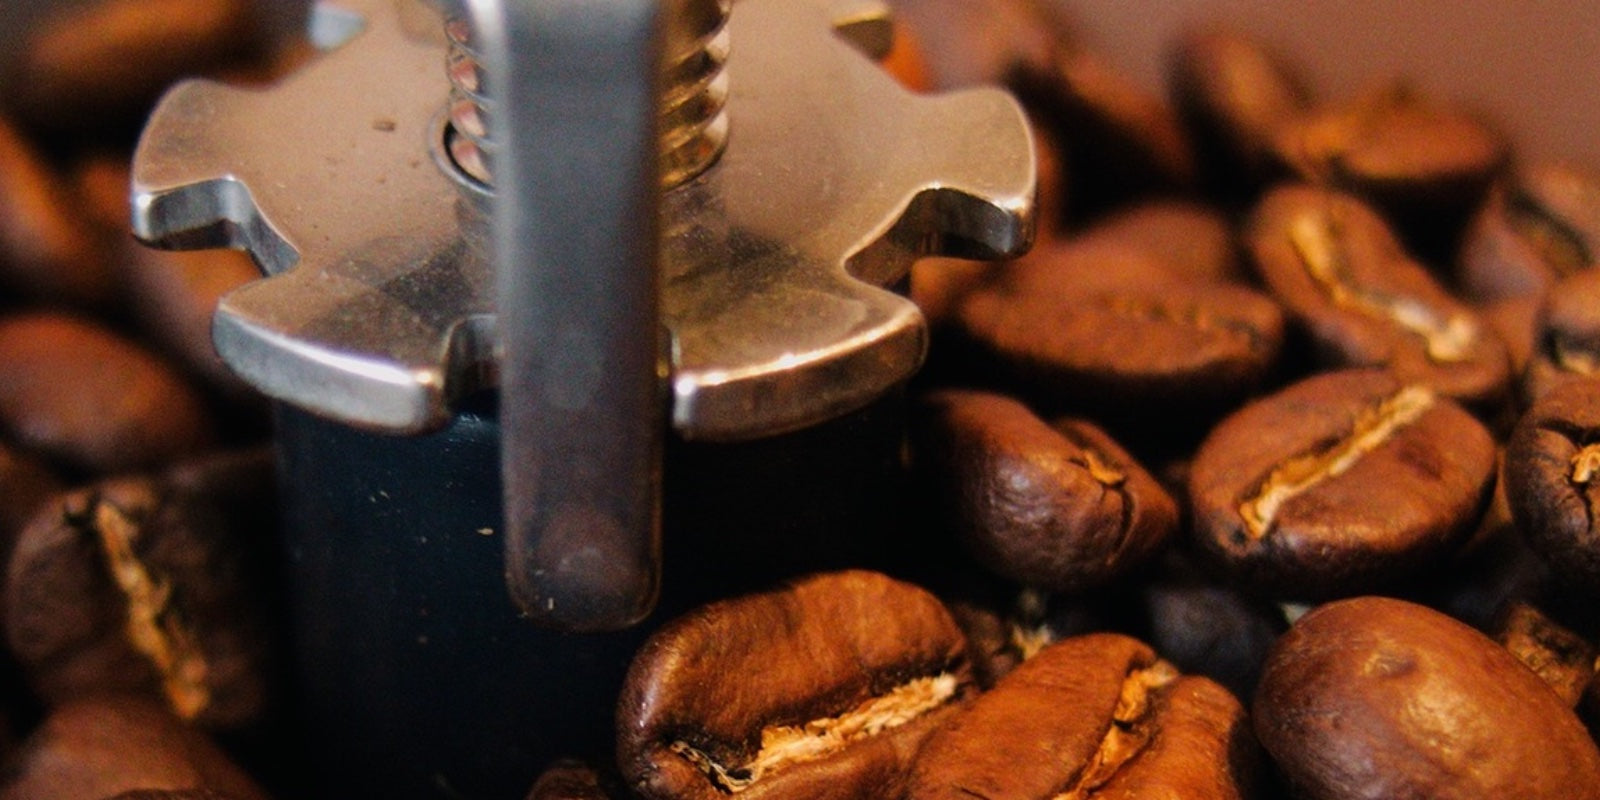 Can You Use Other Appliances or Items to Grind Coffee Beans